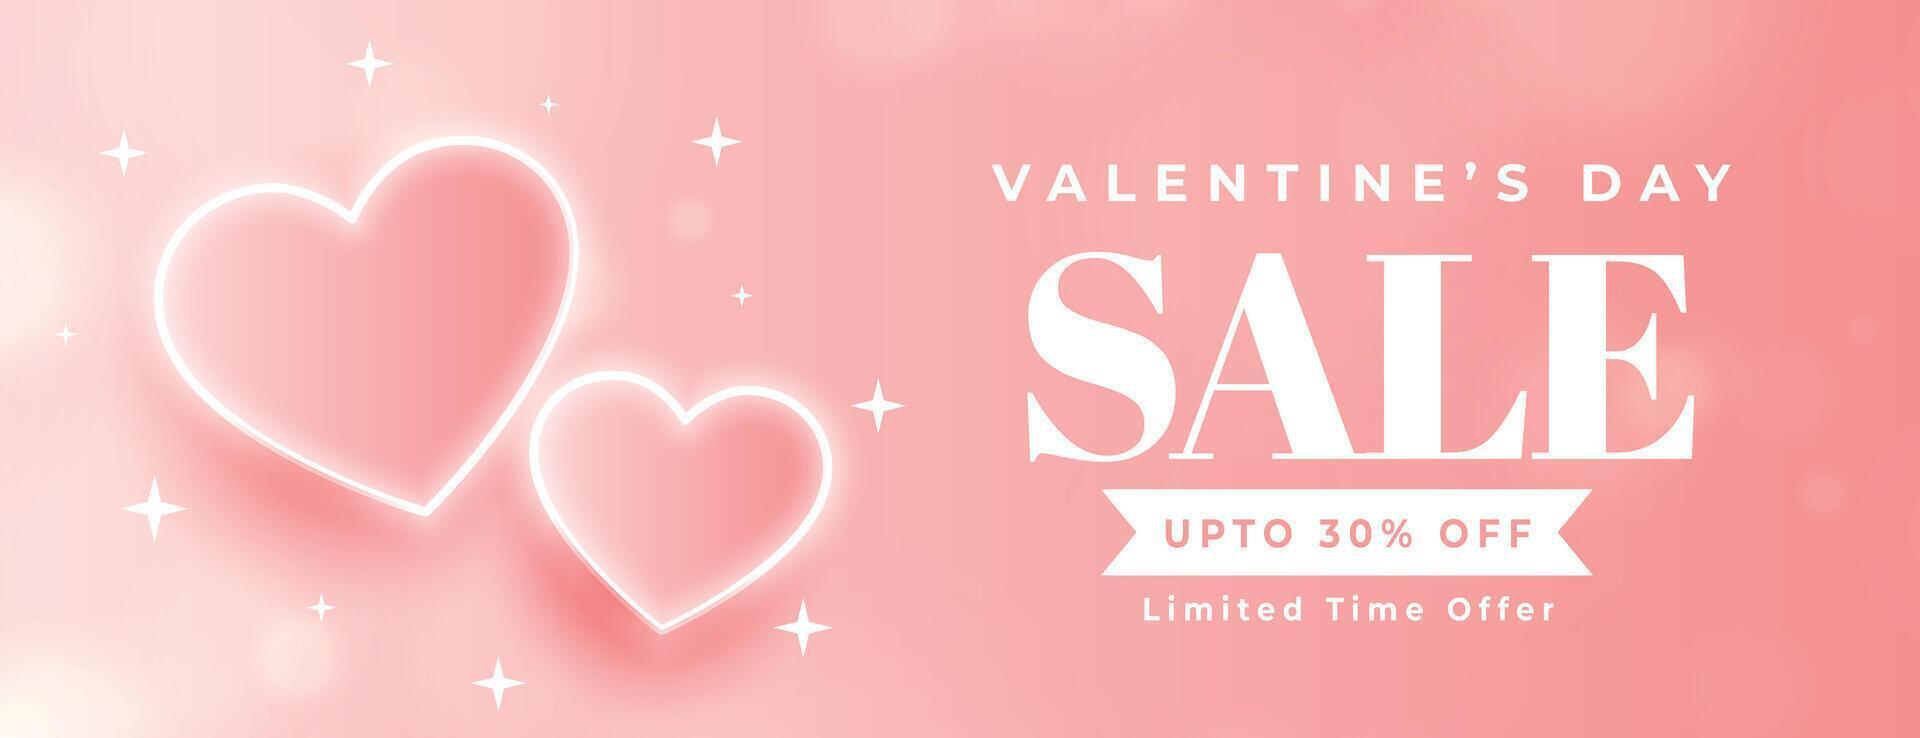 valentines day sale banner with glowing neon hearts vector